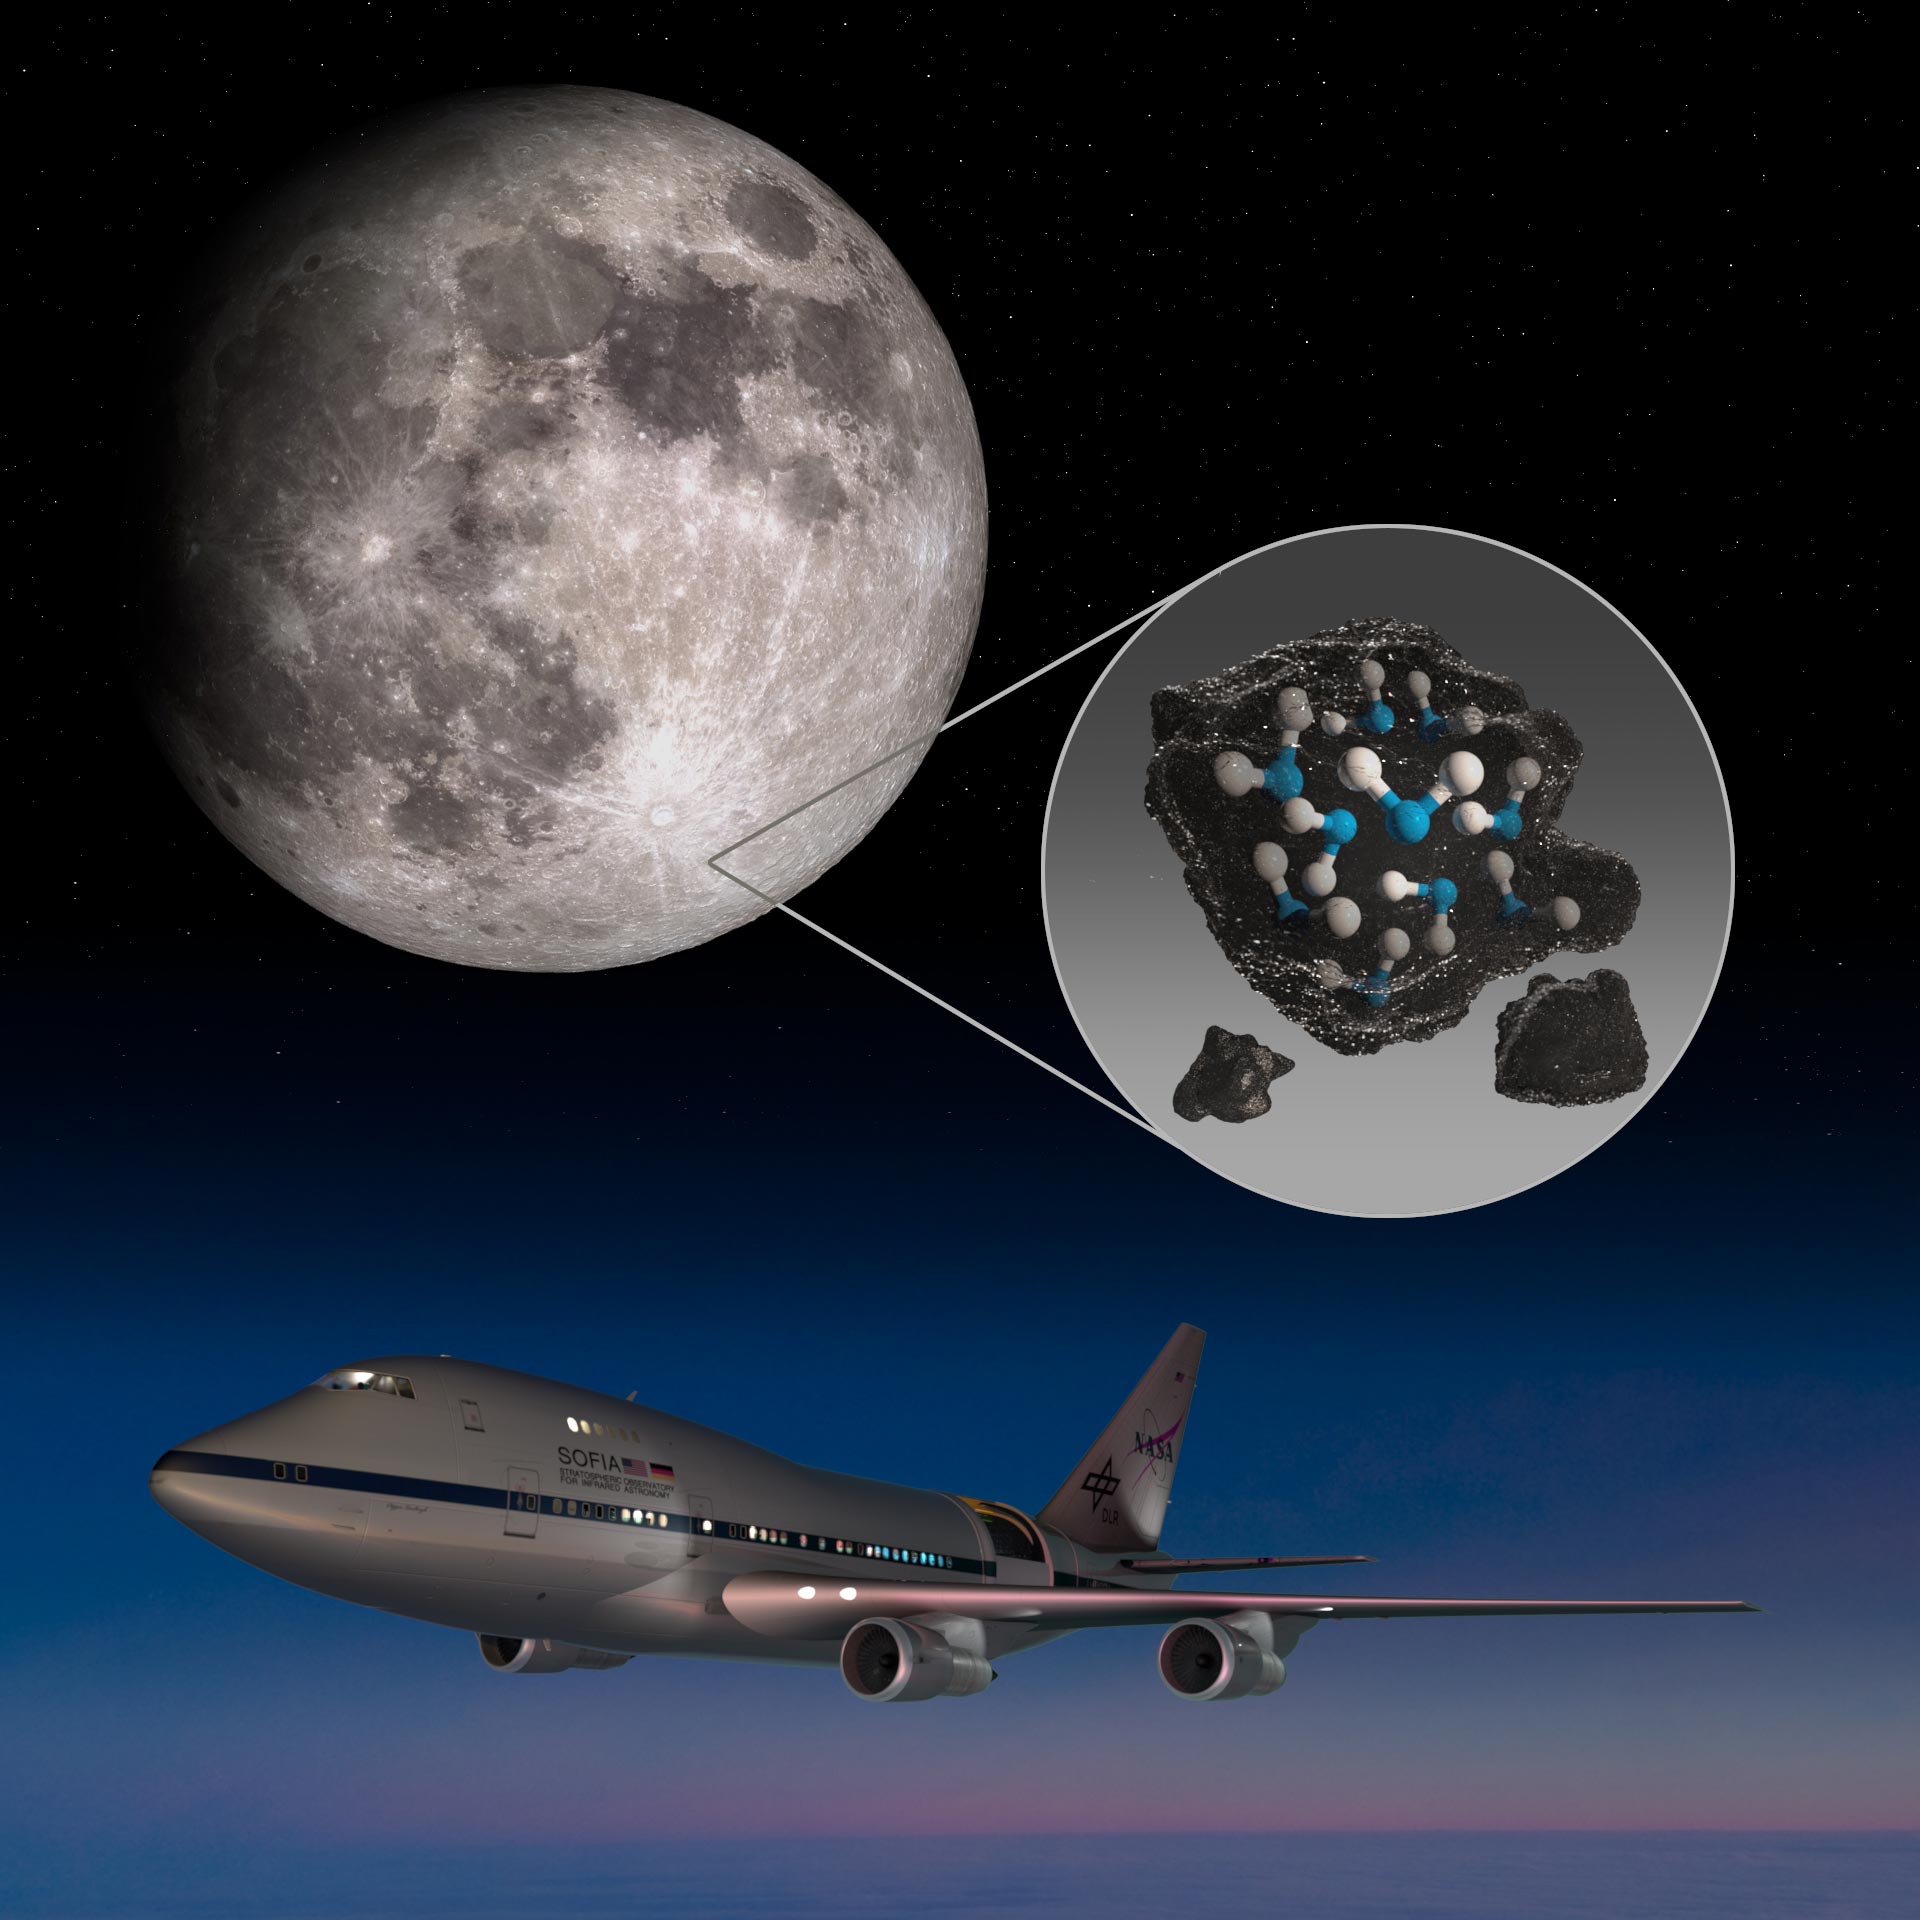 NASA's Airborne Observatory Discovers Water on Sunlit Surface of Moon - SciTechDaily